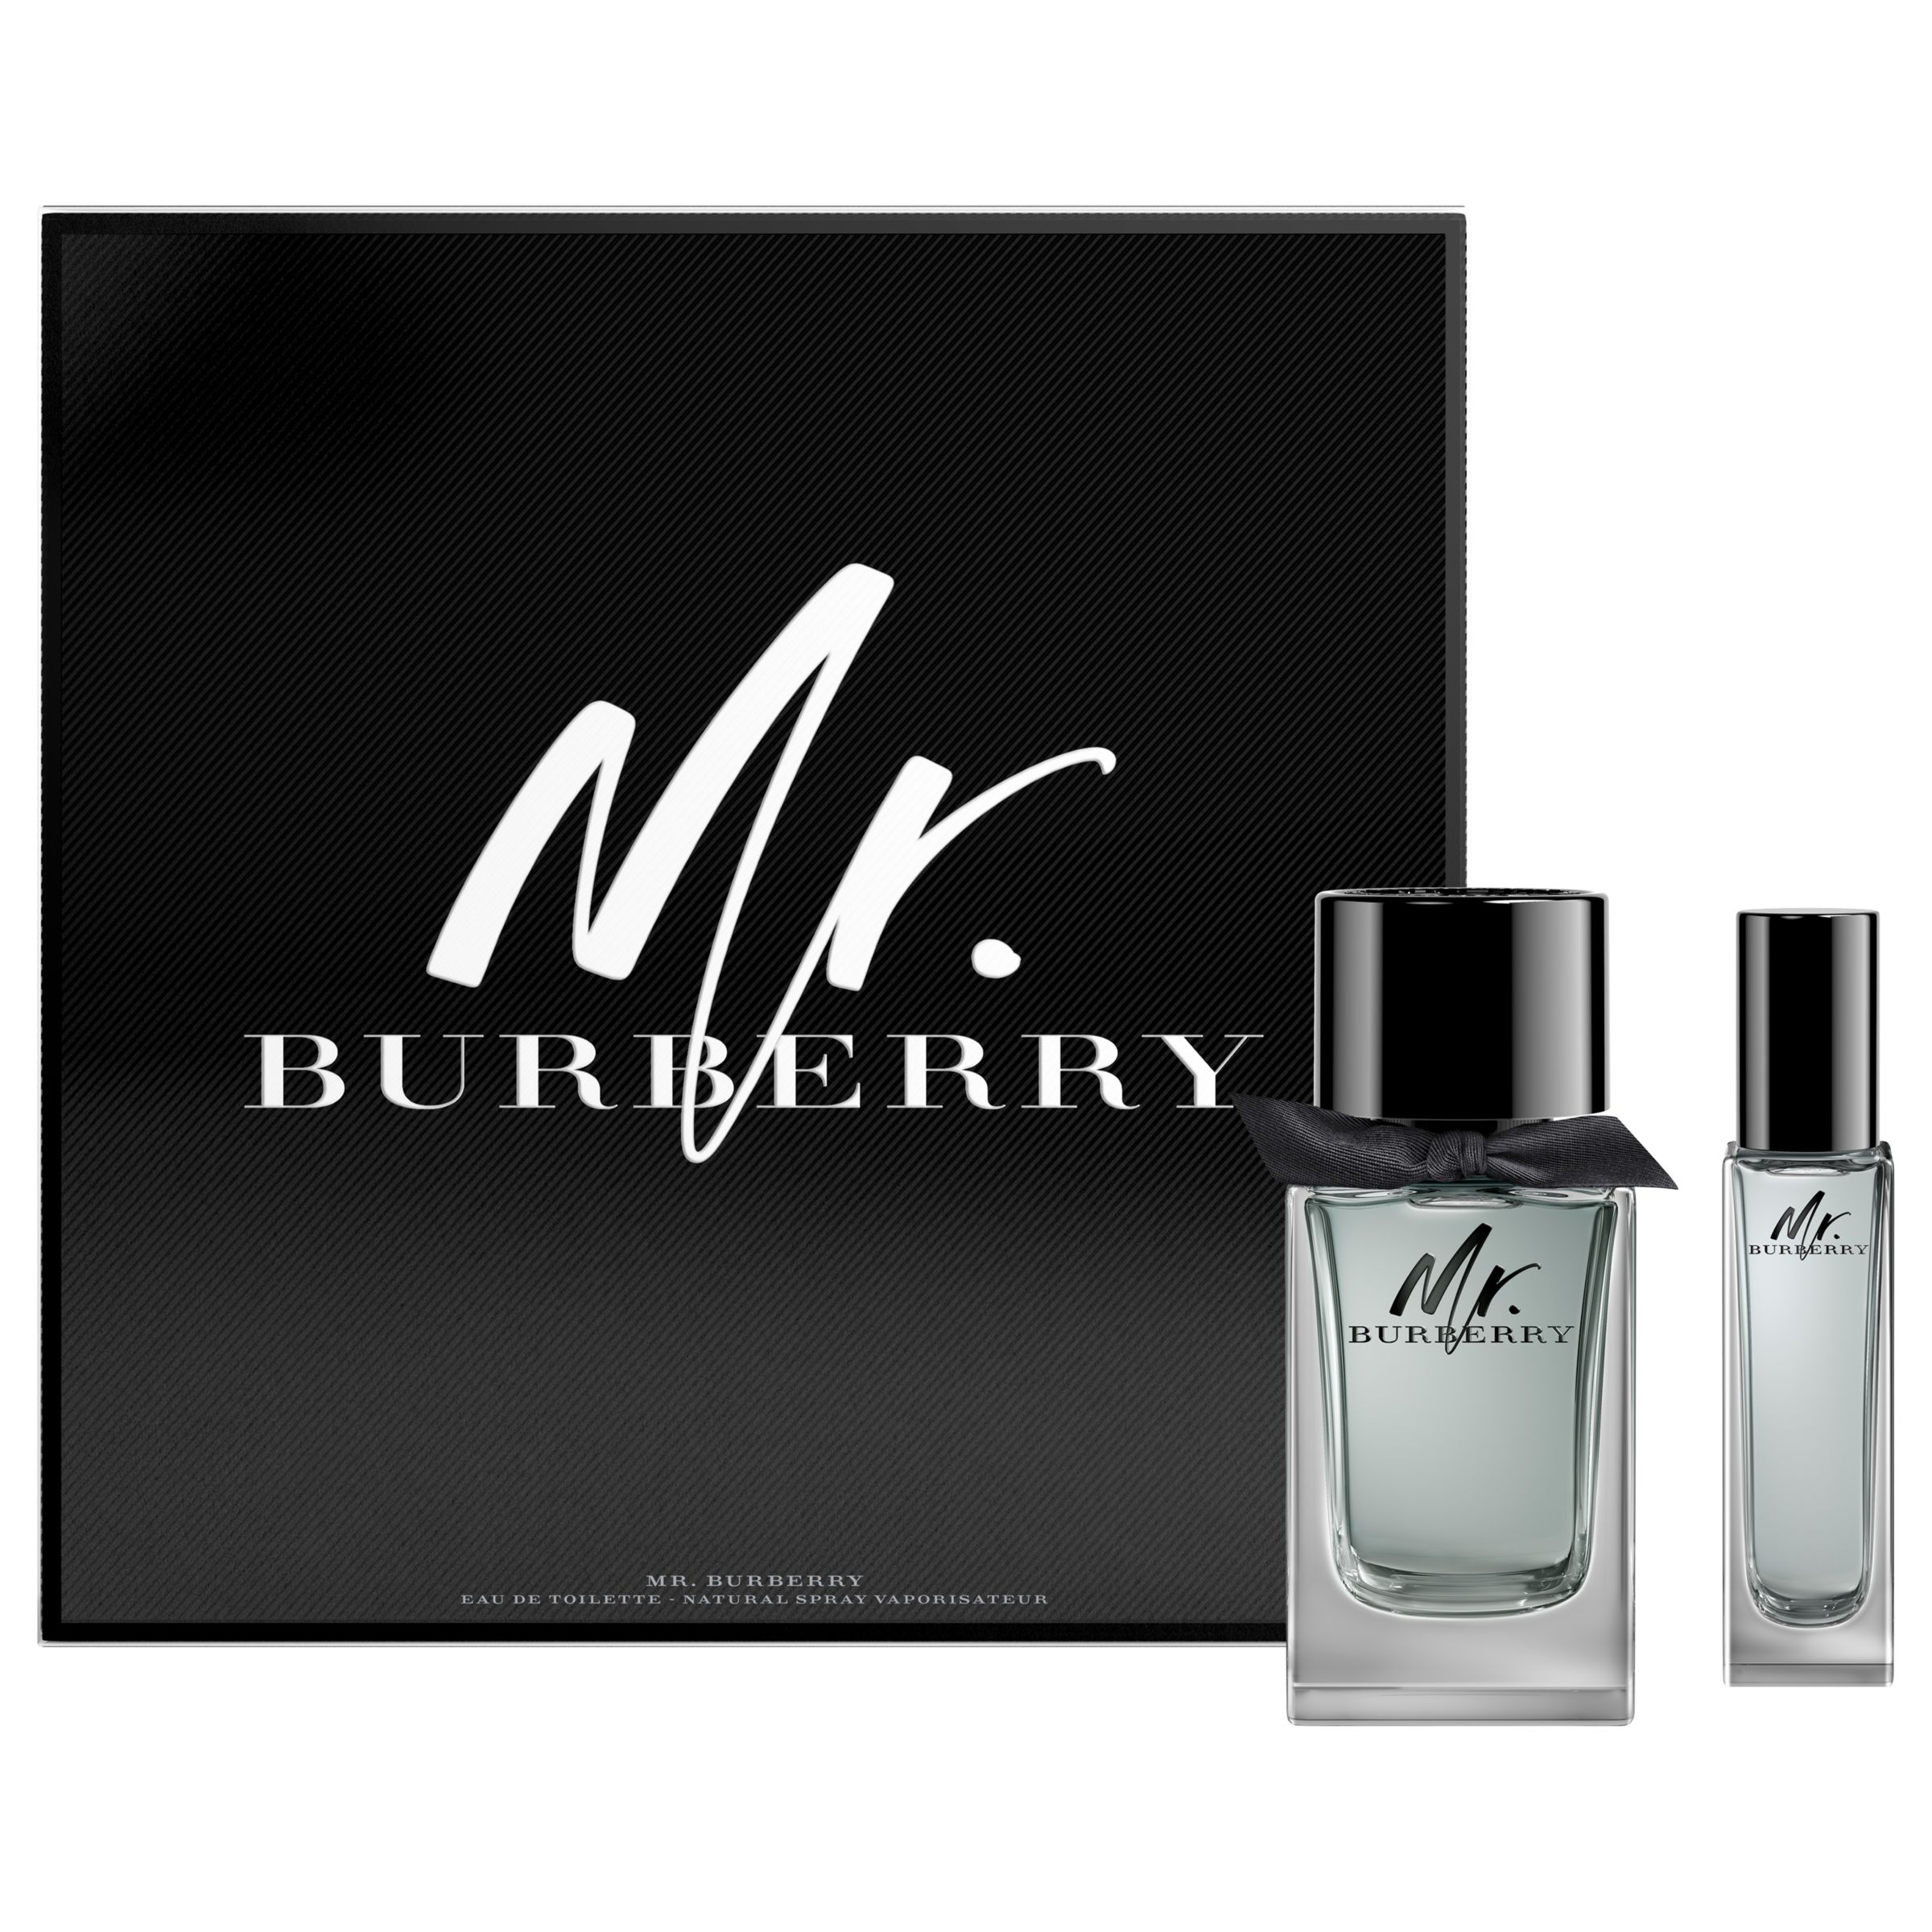 burberry travel collection perfume